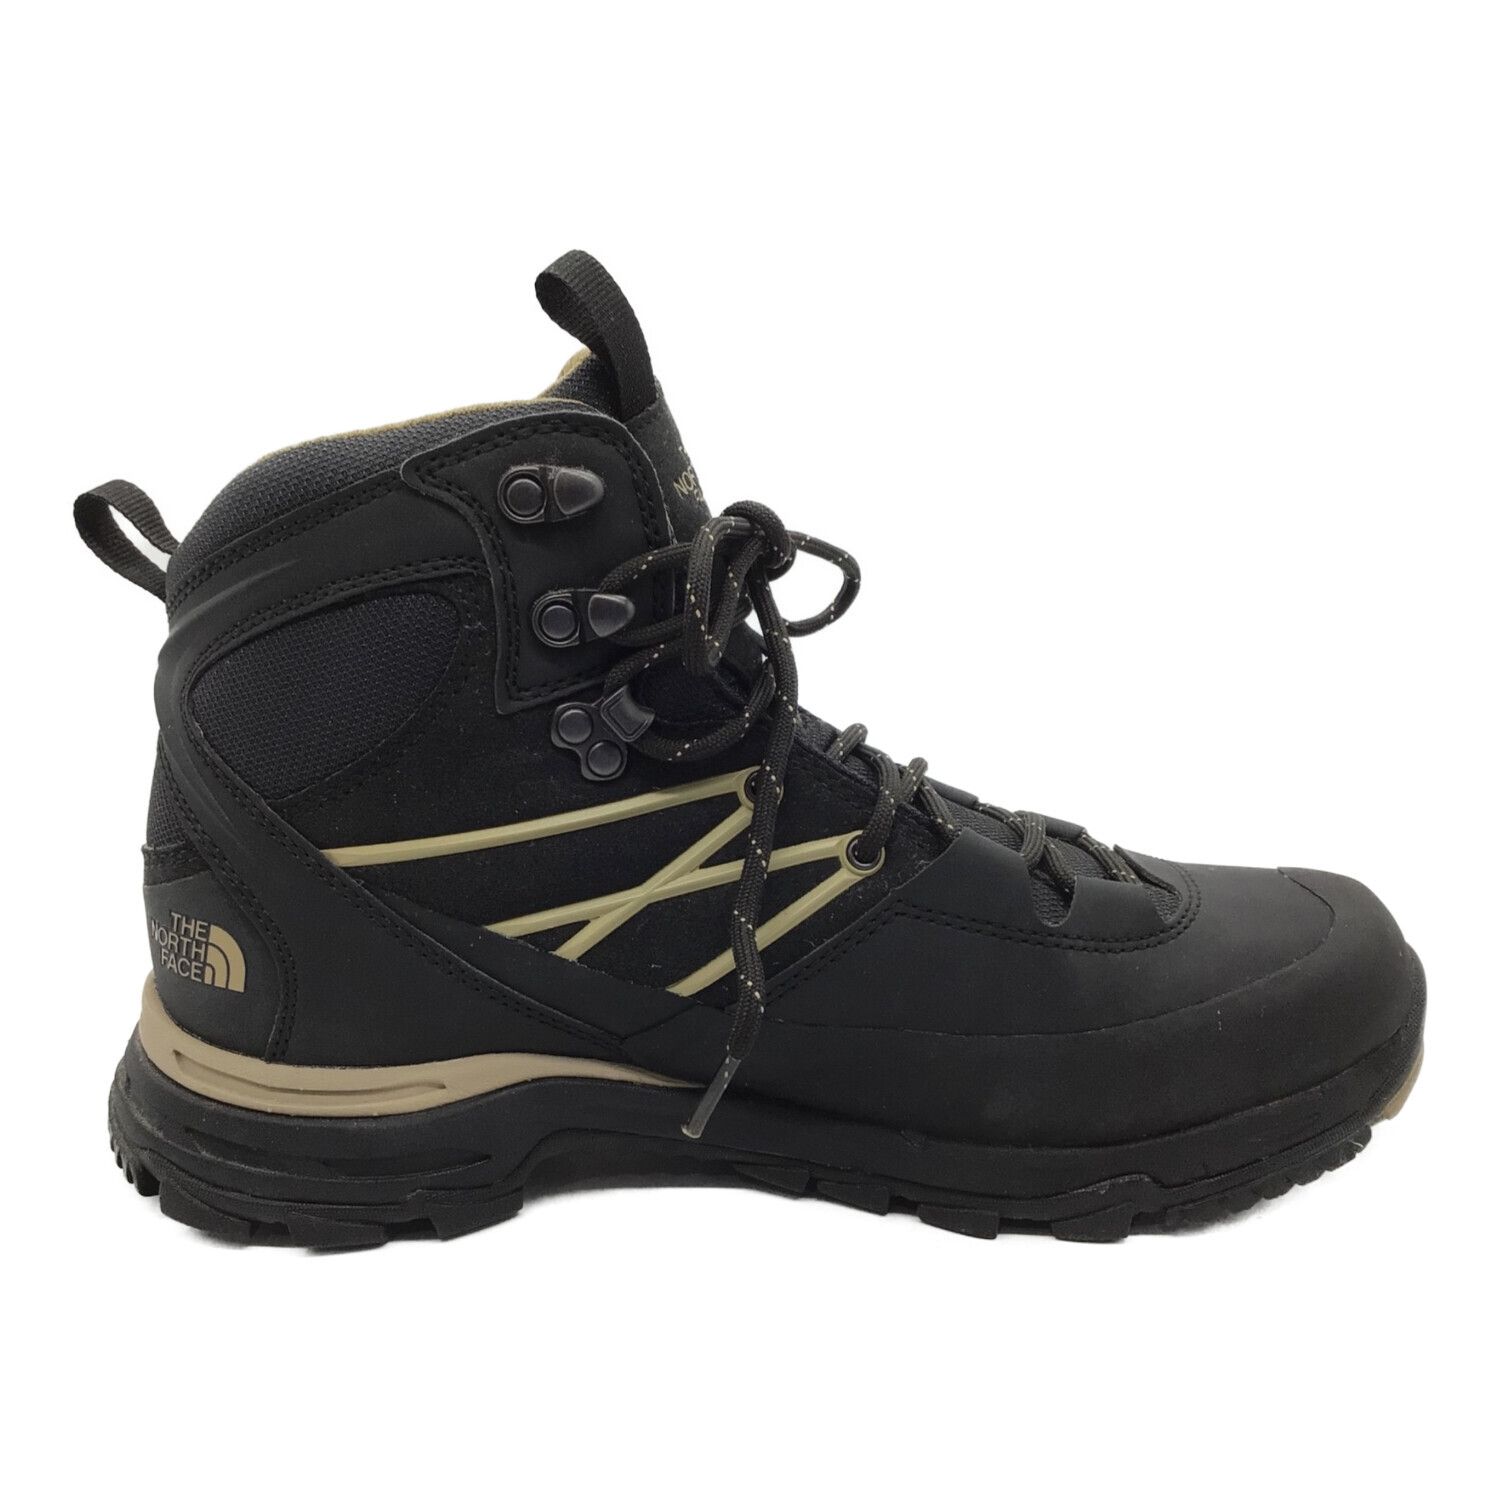 THE NORTH FACE (ザ ノース フェイス) NORTHOTIC PRO 2.0 NF0A2RS9 